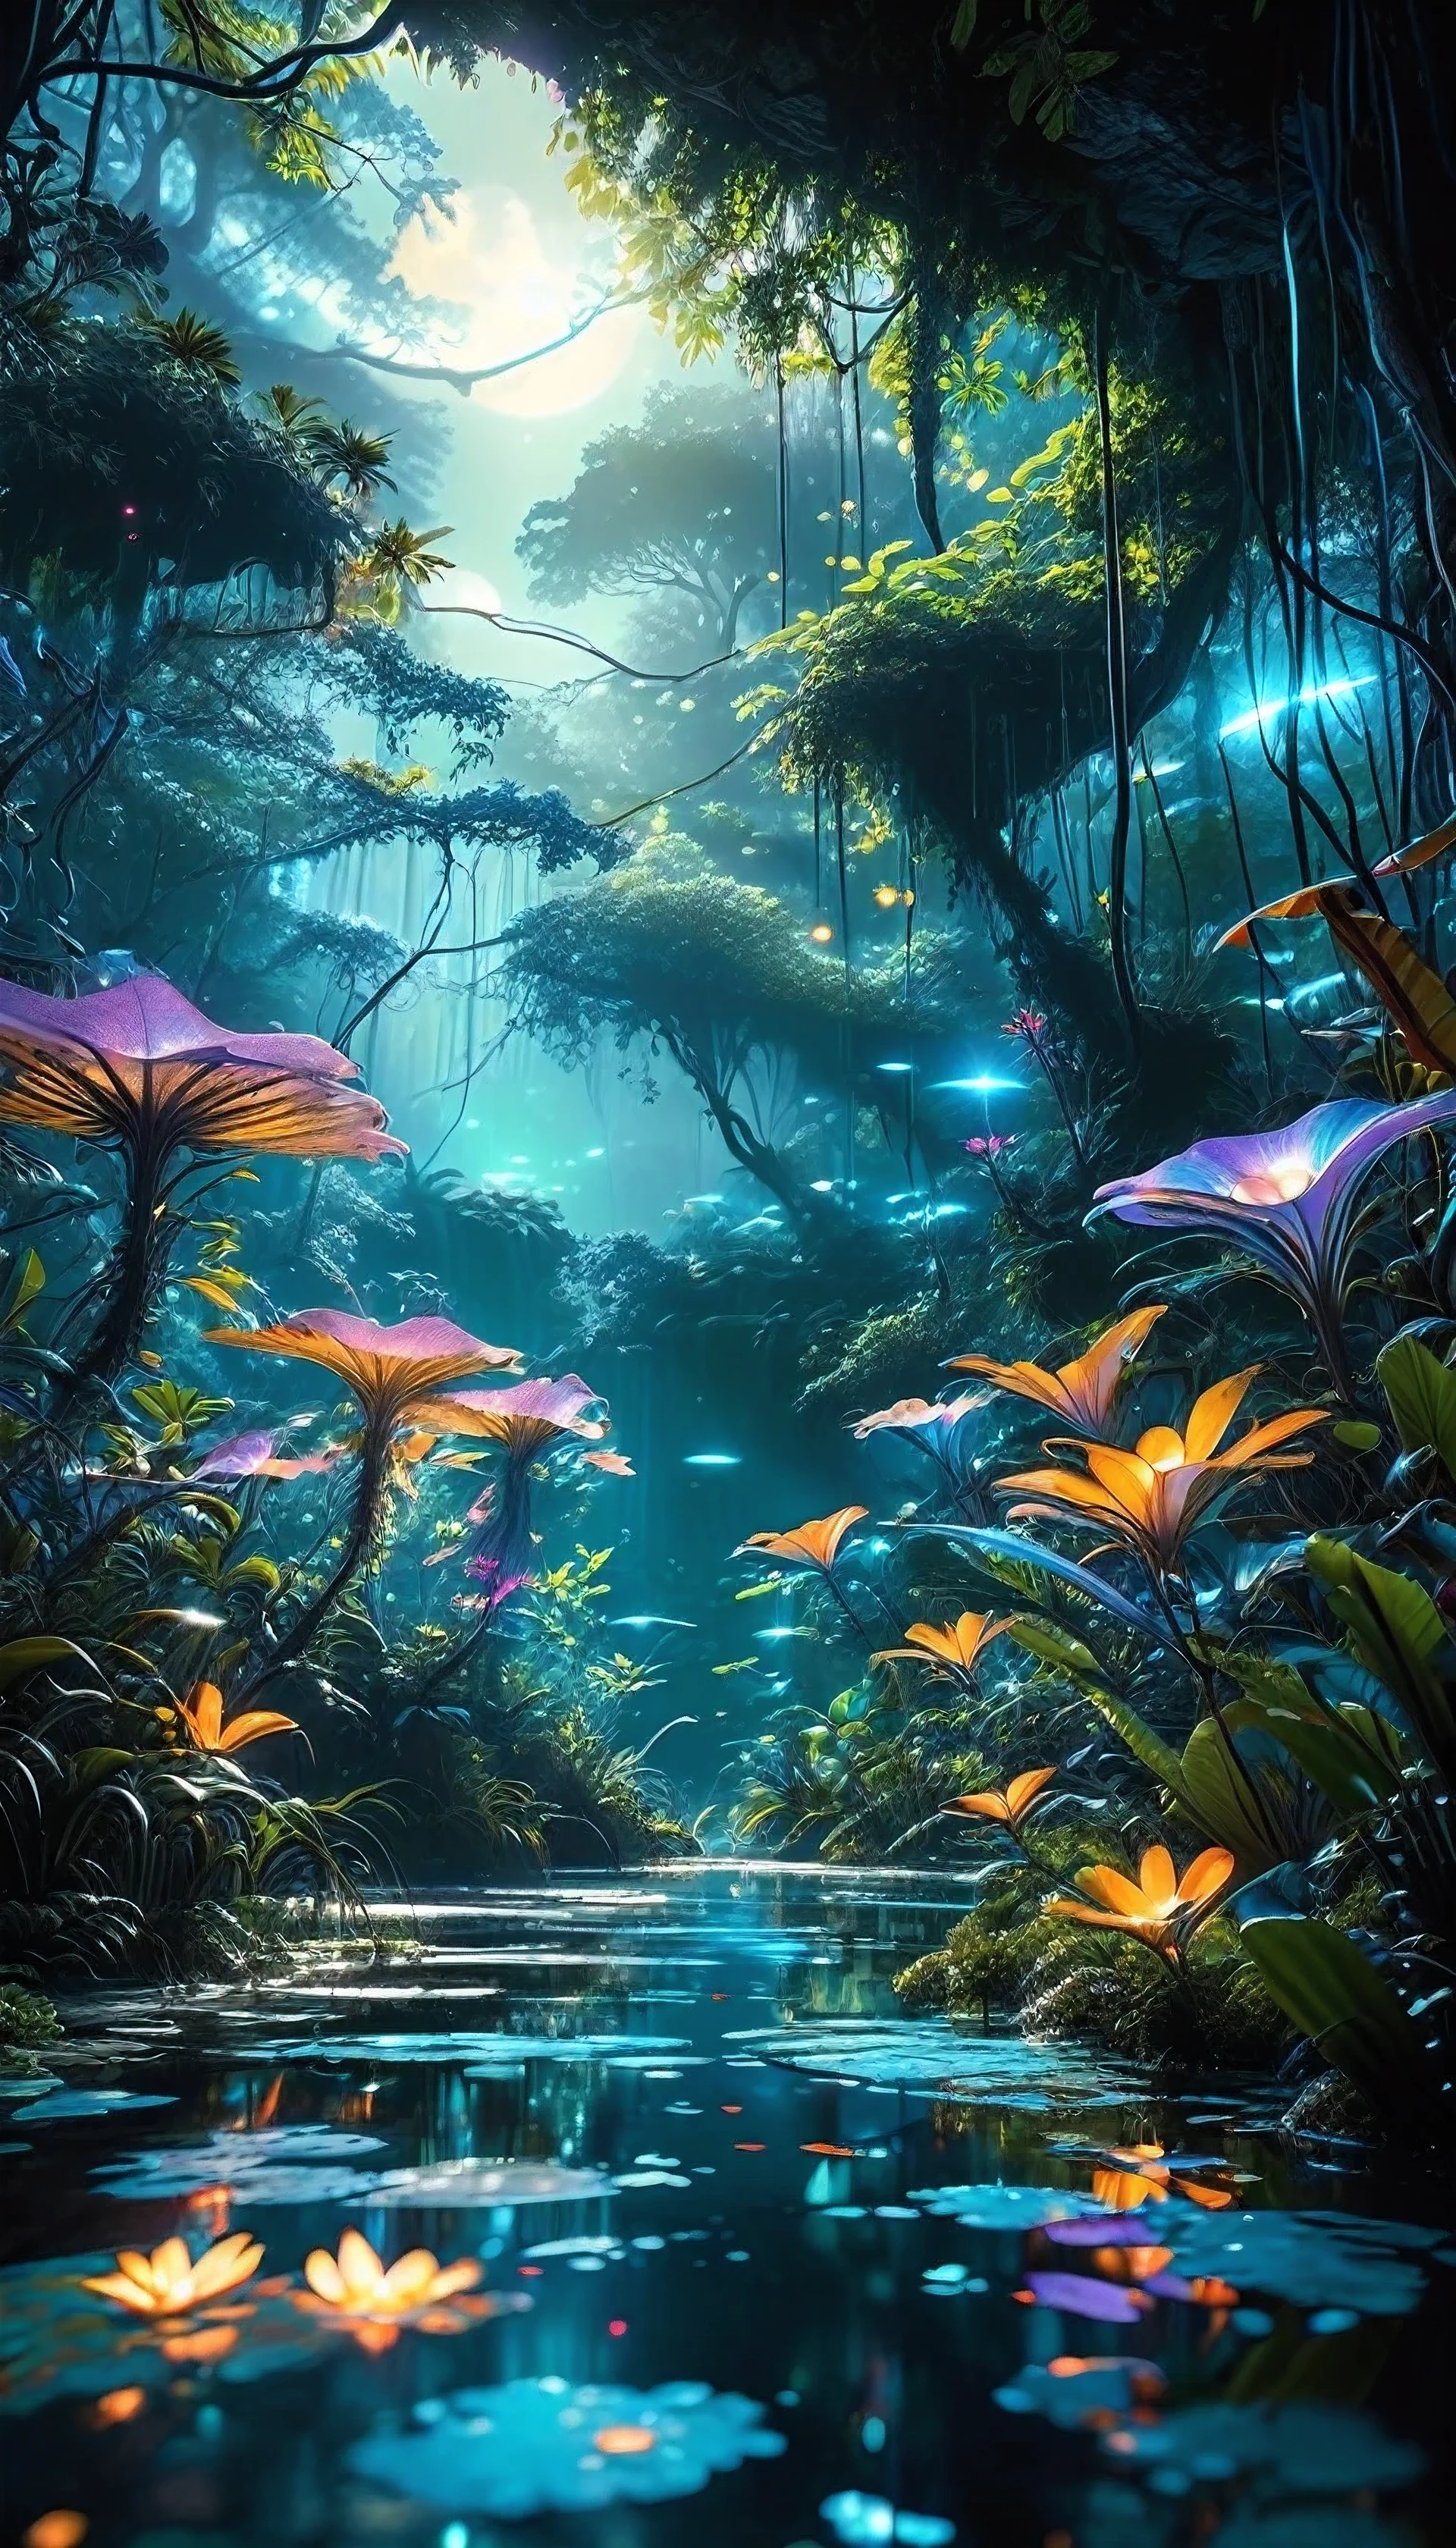 Create an enthralling scene of a nighttime safari in a bioluminescent jungle, rendered in highly detailed digital art with 4K and 8K resolutions, using Octane and inspired by the style of Avatar. This concept art should be a masterpiece of official illustration, merging realism and fantastical elements to achieve the highest quality.

The landscape is a dense, tropical jungle, illuminated by the glow of bioluminescent plants and creatures. Towering trees with luminescent vines create a canopy that filters the moonlight, casting a surreal, bluish tint over the jungle floor. Exotic flowers and fungi emit soft, multicolored glows, lighting up the night.

In the midst of this jungle, a safari group navigates through the dense foliage, their path illuminated by the surrounding bioluminescence. Their presence stirs the nocturnal wildlife, including ethereal, glowing insects and majestic creatures that blend realism with fantastical elements. The distant sound of flowing water adds to the ambiance, suggesting a hidden waterfall nearby.

The night sky is visible through gaps in the canopy, revealing a myriad of stars and distant galaxies. The interplay between the natural light of the stars and the bioluminescence of the jungle creates a mesmerizing atmosphere.

The composition focuses on the interplay between the grand, towering trees and the delicate details of the glowing flora and fauna. The rendering by Octane captures the textures of the jungle, the light reflections, and the dynamic movement of the safari group, creating a scene of stunning realism and fantasy.

Every element, from the intricate leaves to the glowing creatures, is meticulously crafted to create a vivid and immersive experience. This digital artwork embodies the imaginative and perfect composition envisioned by artists like James Cameron and Roger Deakins, making it a true masterpiece.